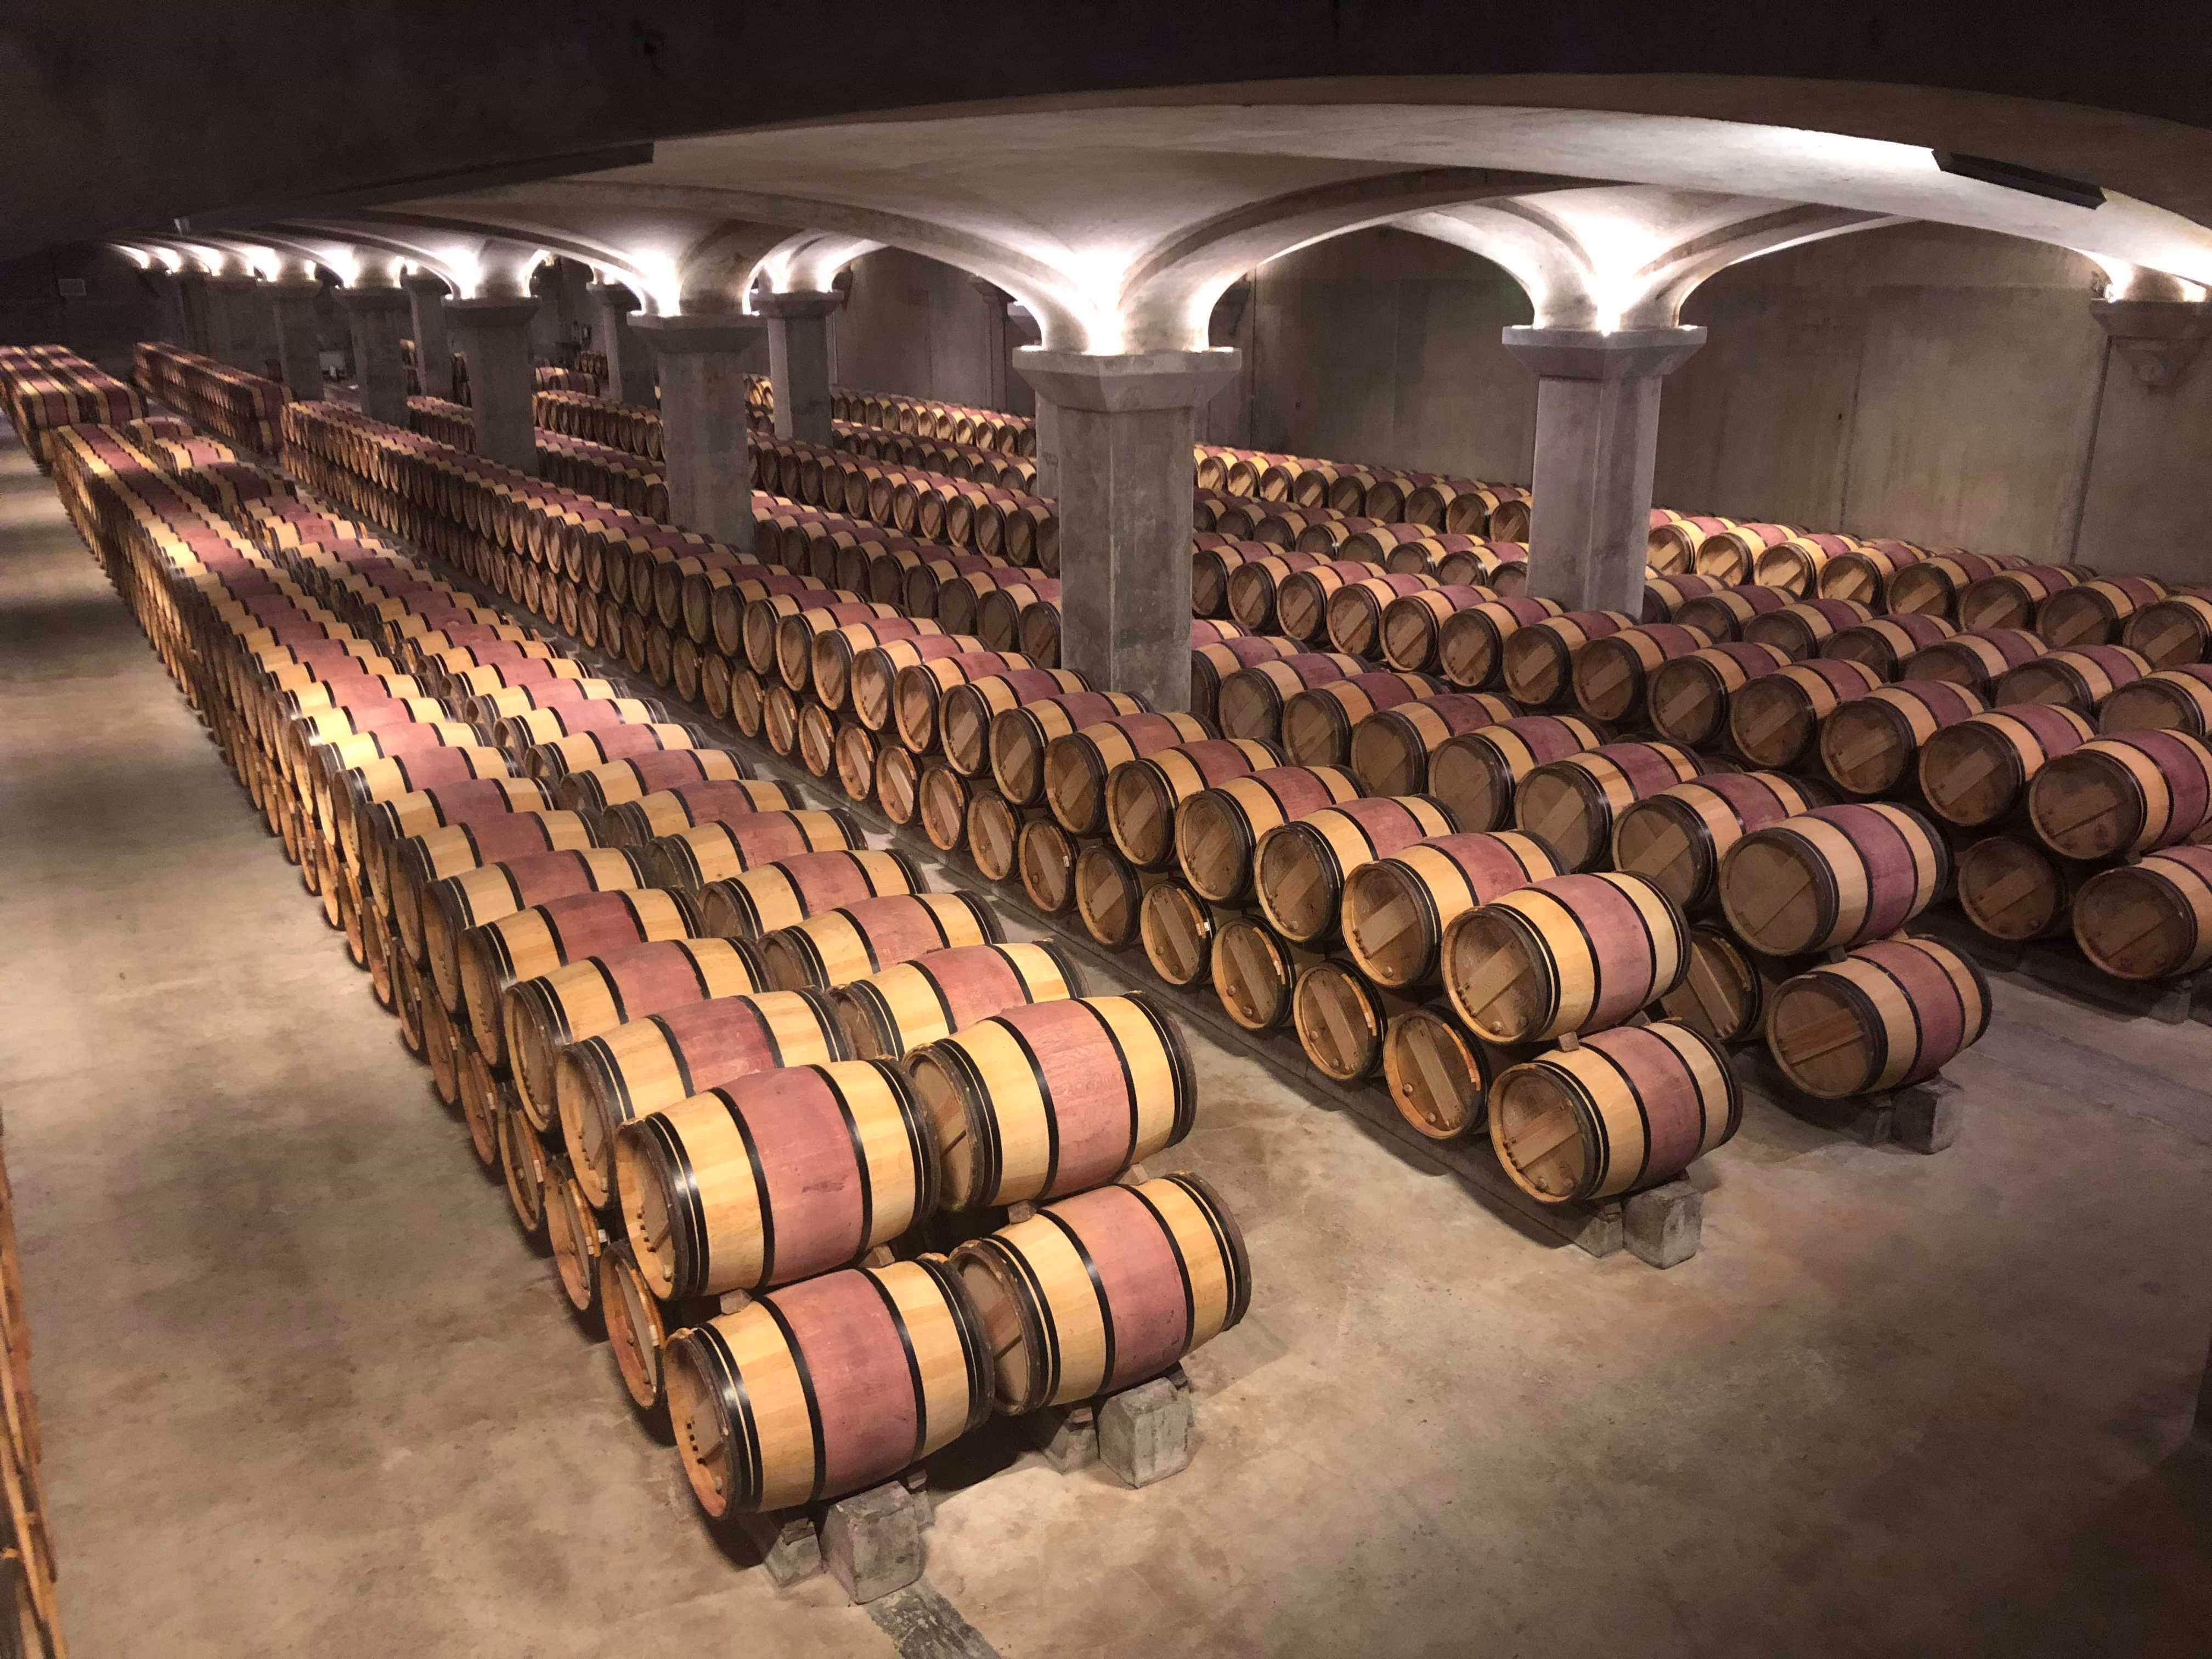 Ageing is oak barrels imparts key flavour characteristics to the fine red wines of Bordeaux